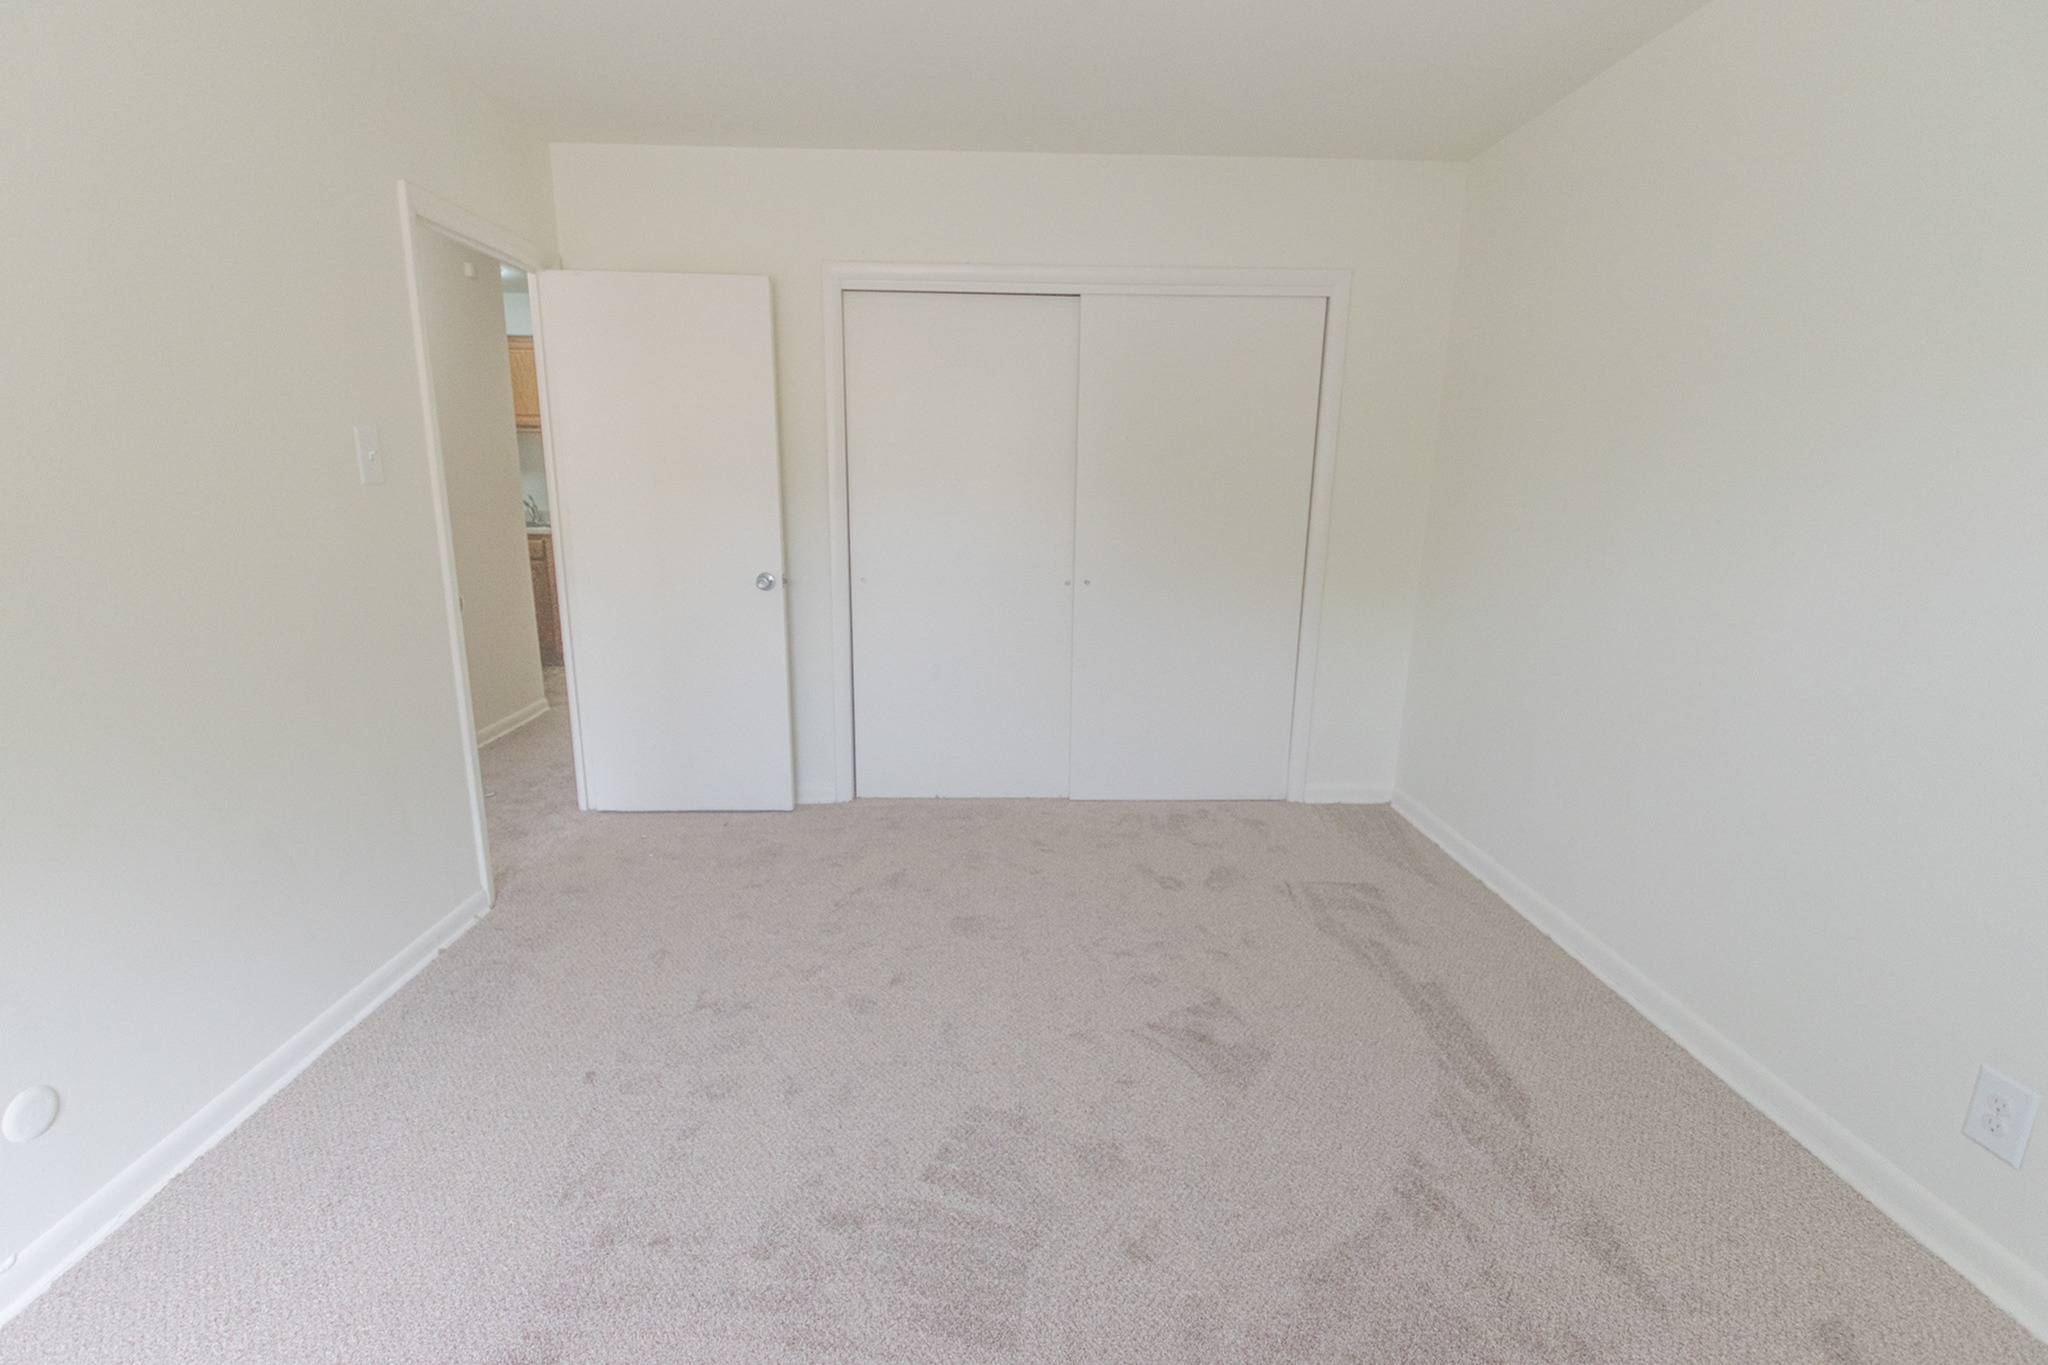 Bedroom with carpets and closet with sliding doors in an apartment at Lansdale Village Apartments.